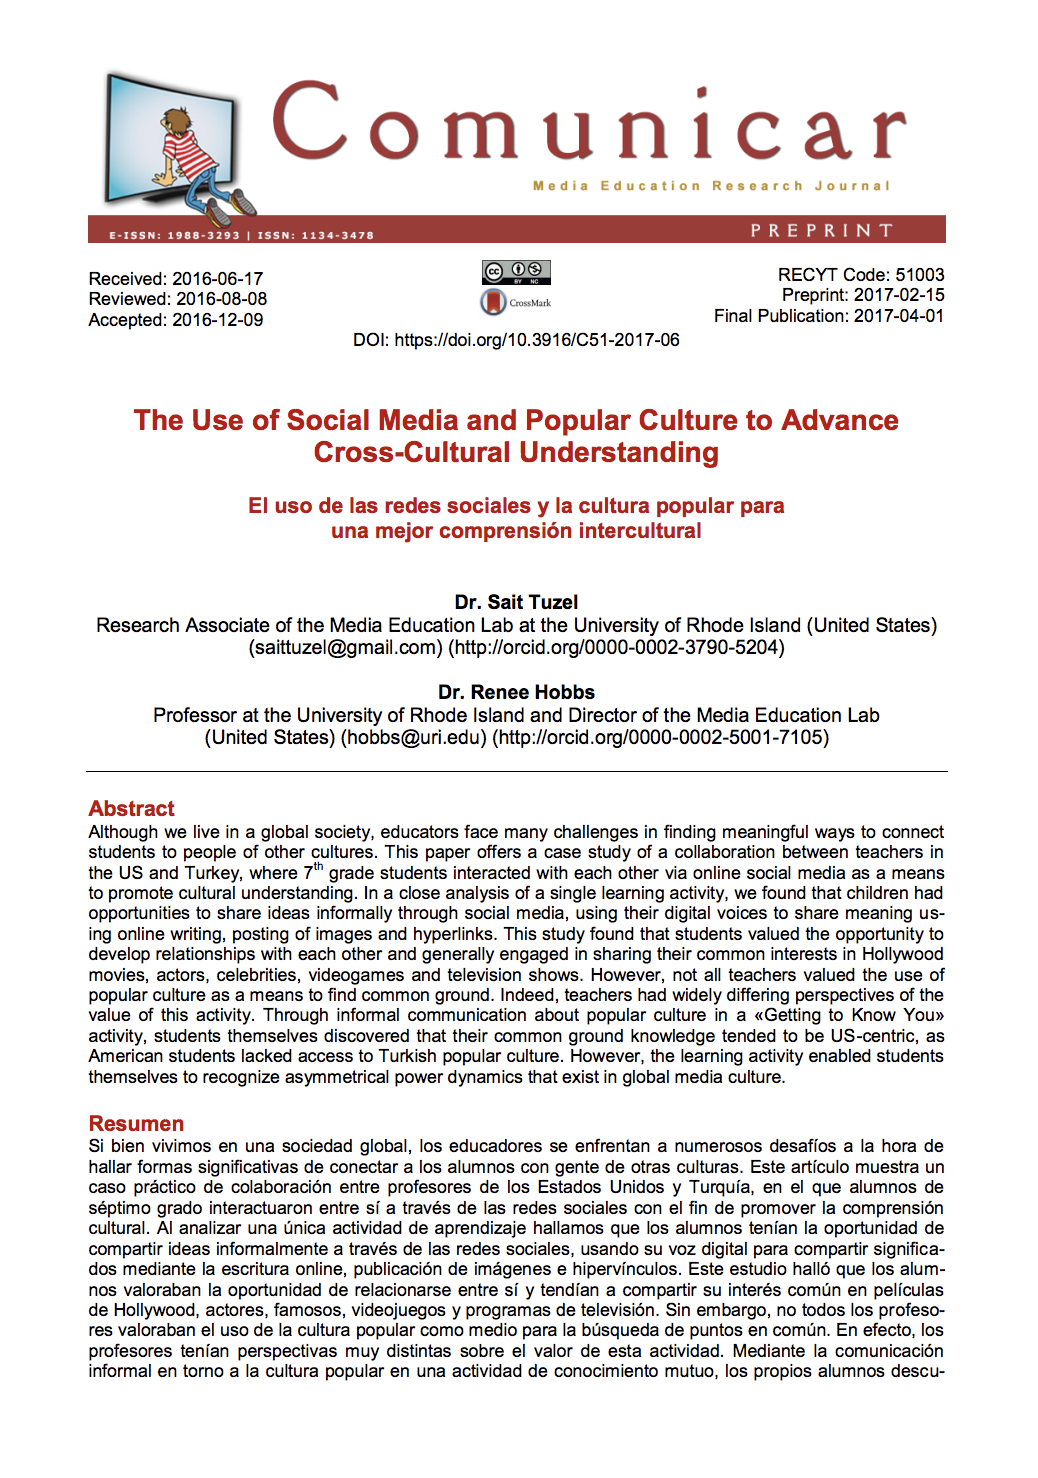 The Use of Social Media and Popular Culture to Advance Cross-Cultural Understanding 